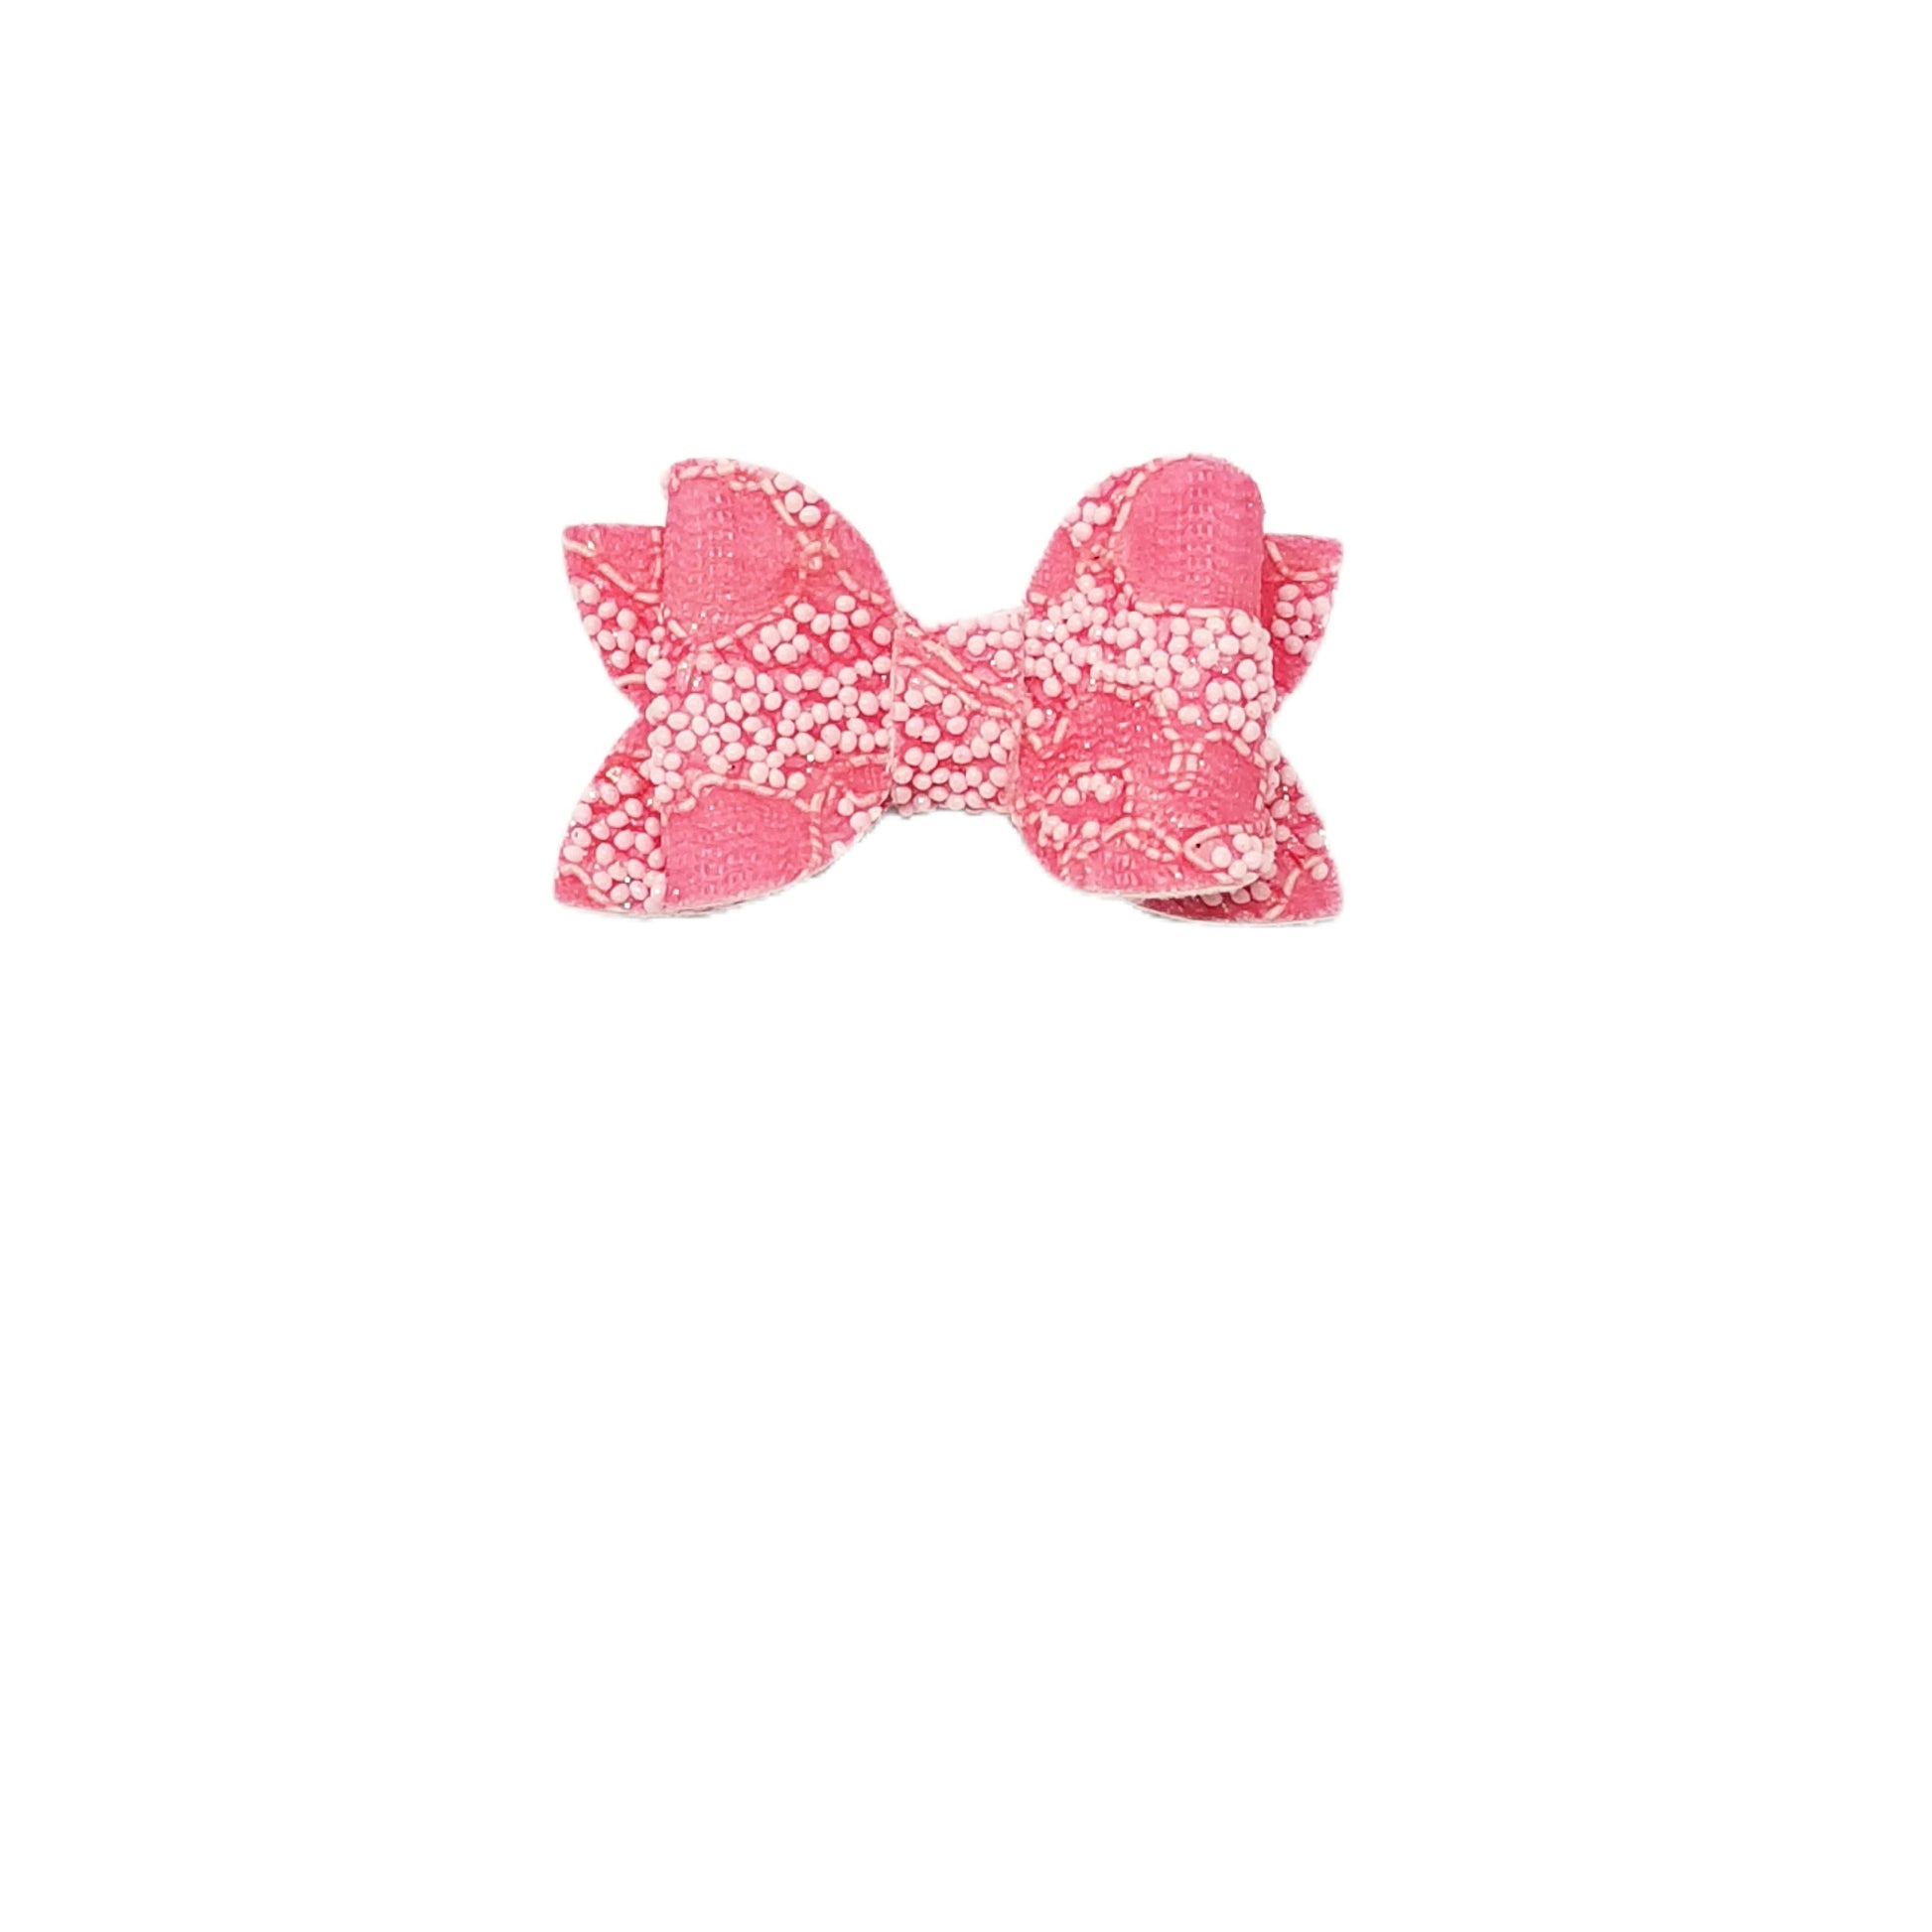 2.75 inch Pink Beaded Lace Diva Bow (pair)